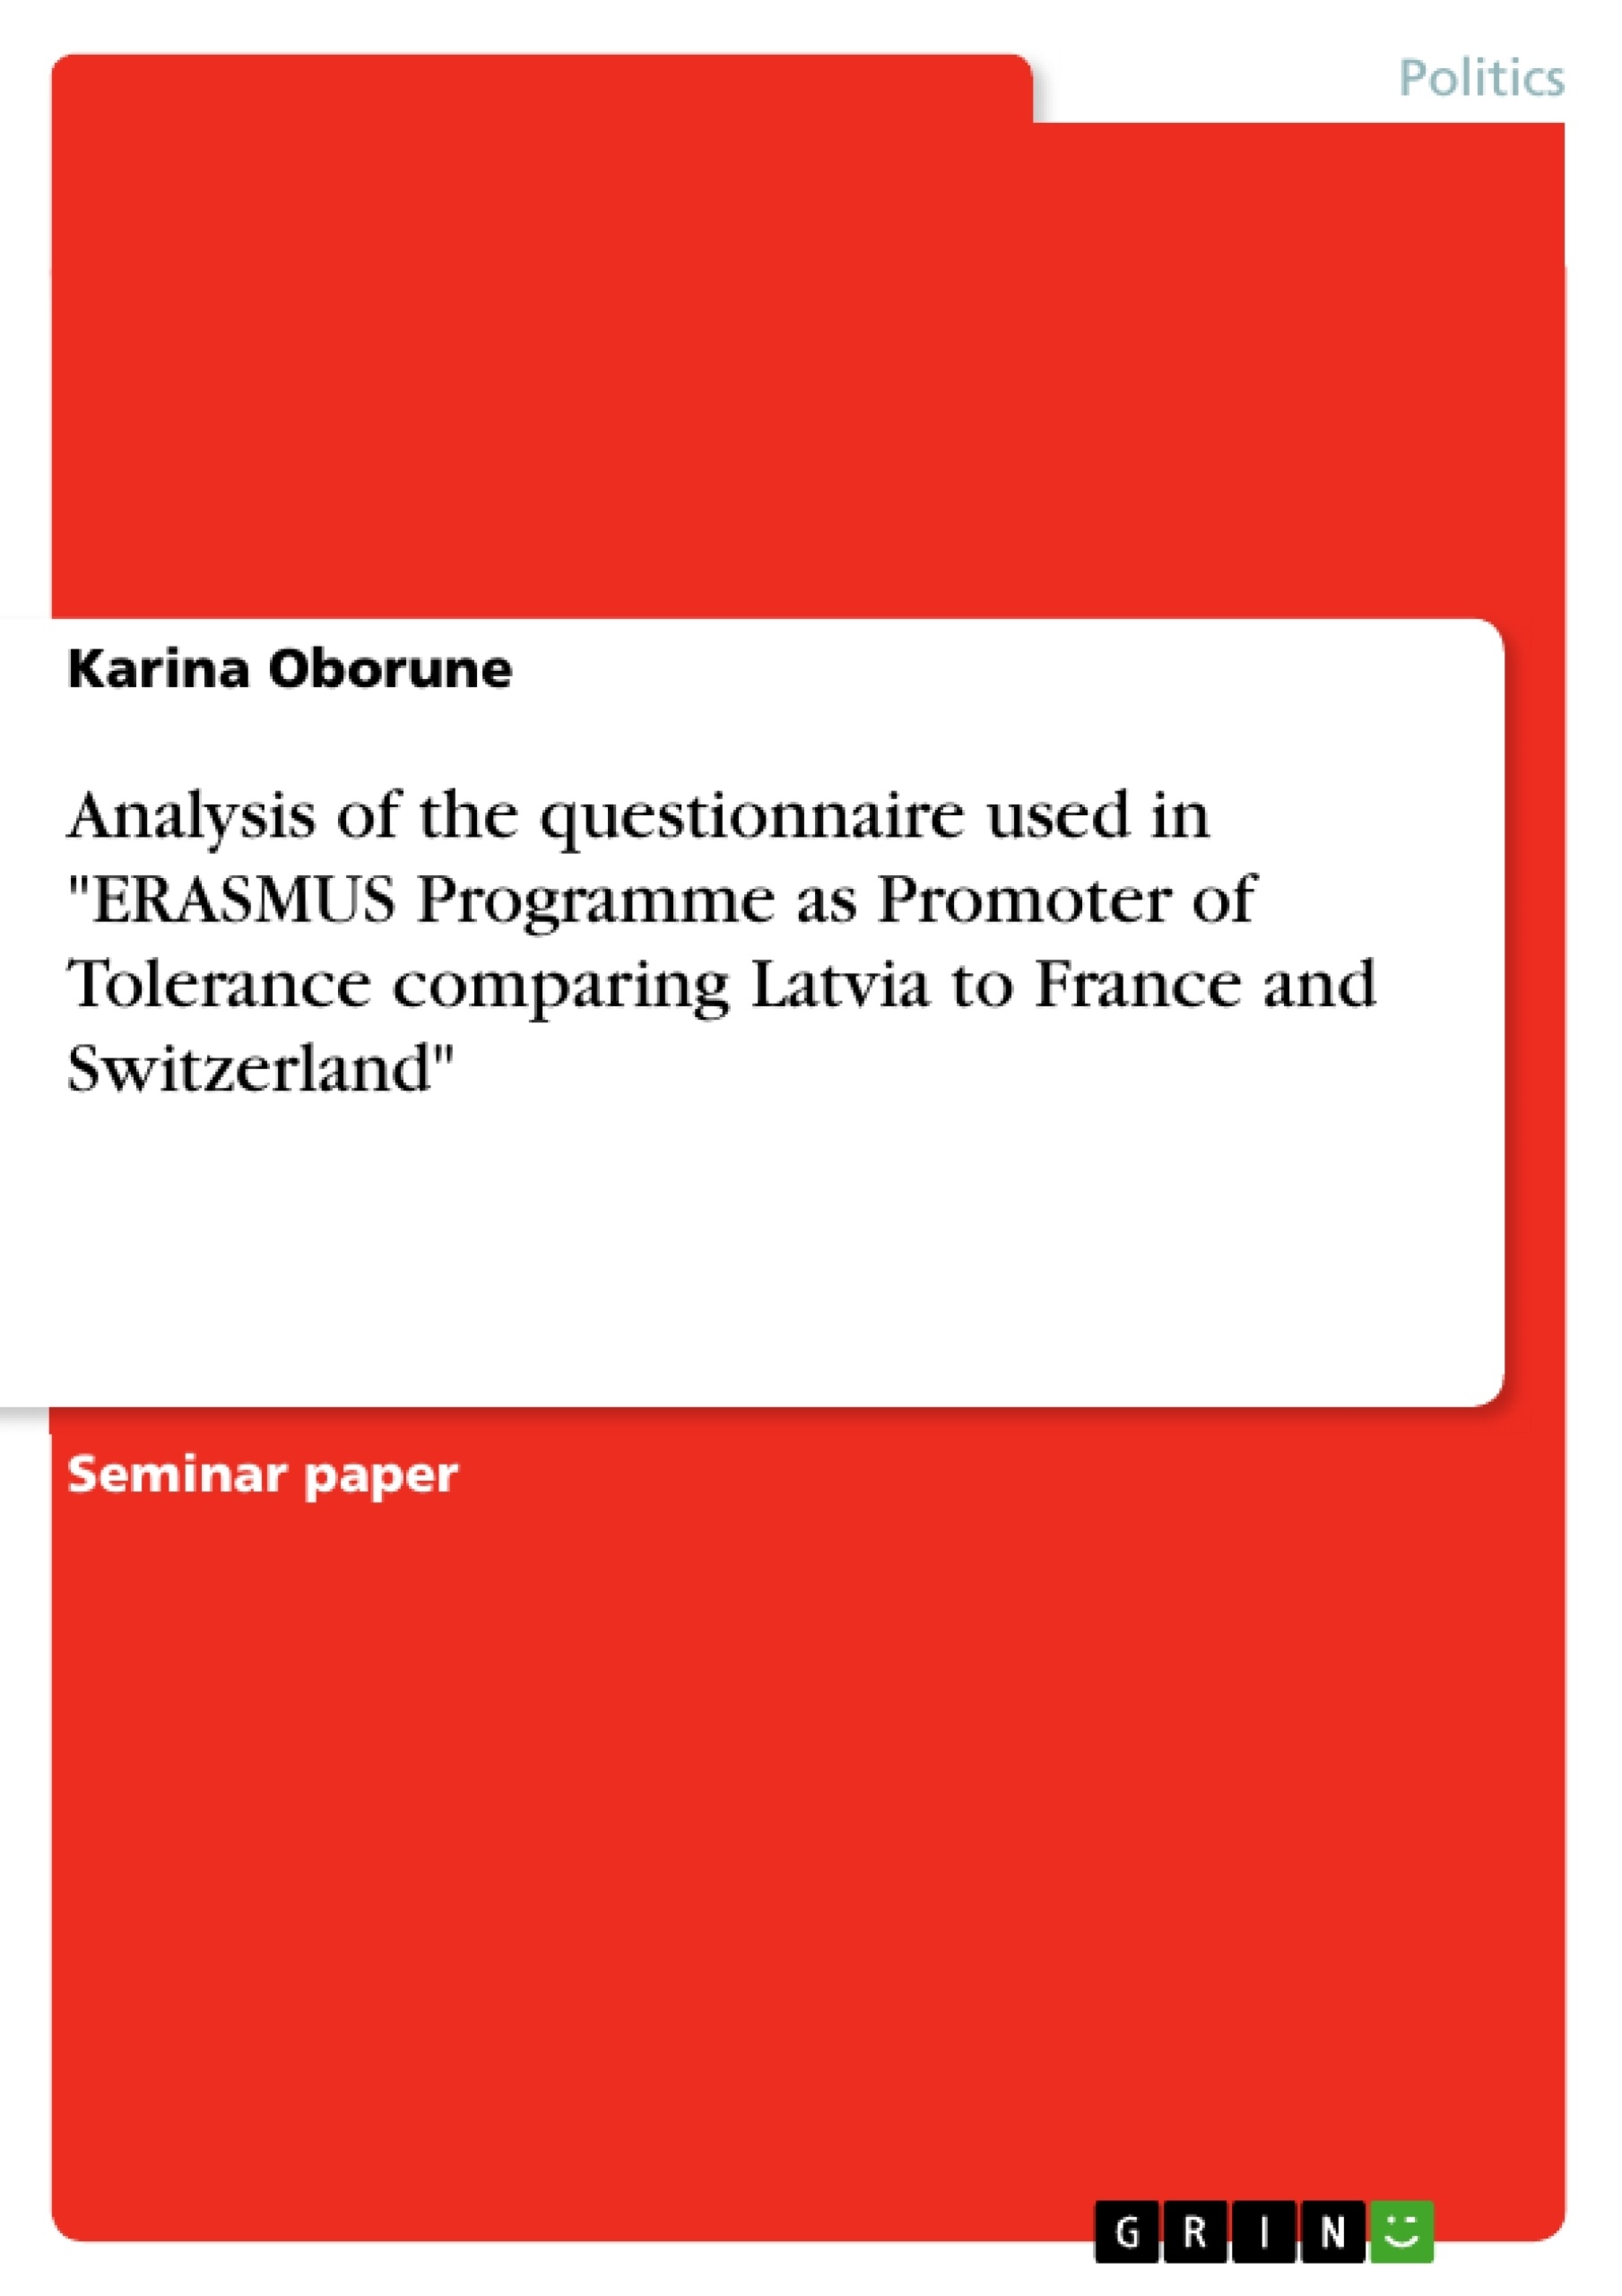 Title: Analysis of the questionnaire used in "ERASMUS Programme as Promoter of Tolerance comparing Latvia to France and Switzerland"